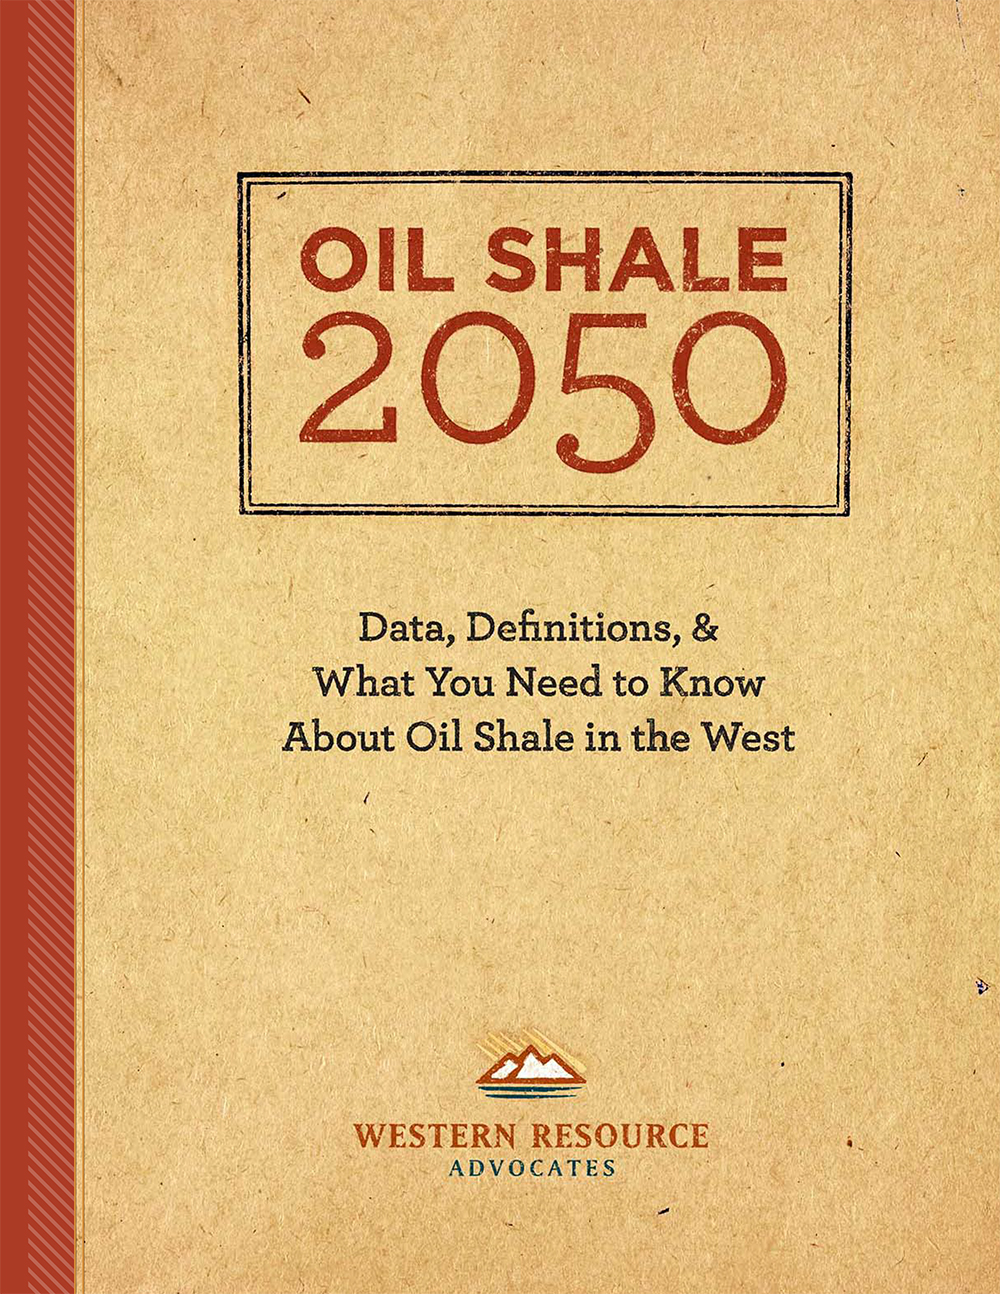 Oil Shale 2050 Report